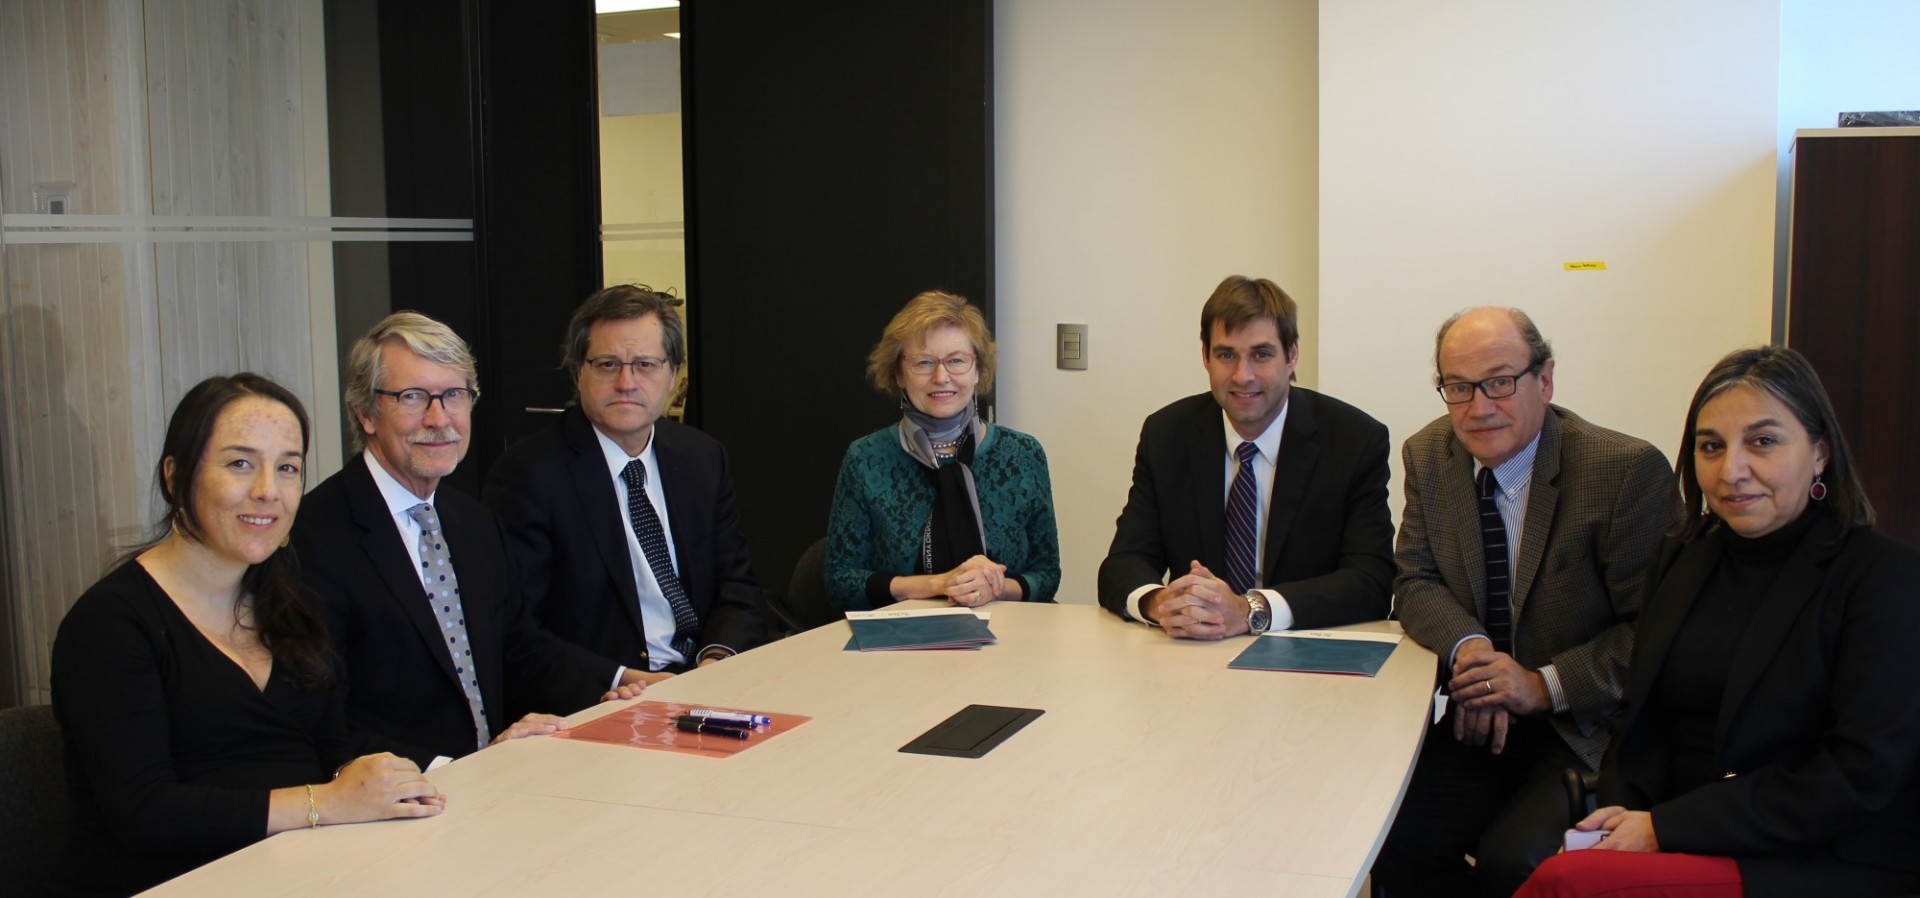 Columbia’s Medical Center signs agreement with Chile’s Universidad del Desarrollo (UDD), the School of Medicine Clínica Alemana-UDD, and the Institute of Sciences and Innovation in Medicine (ICIM).